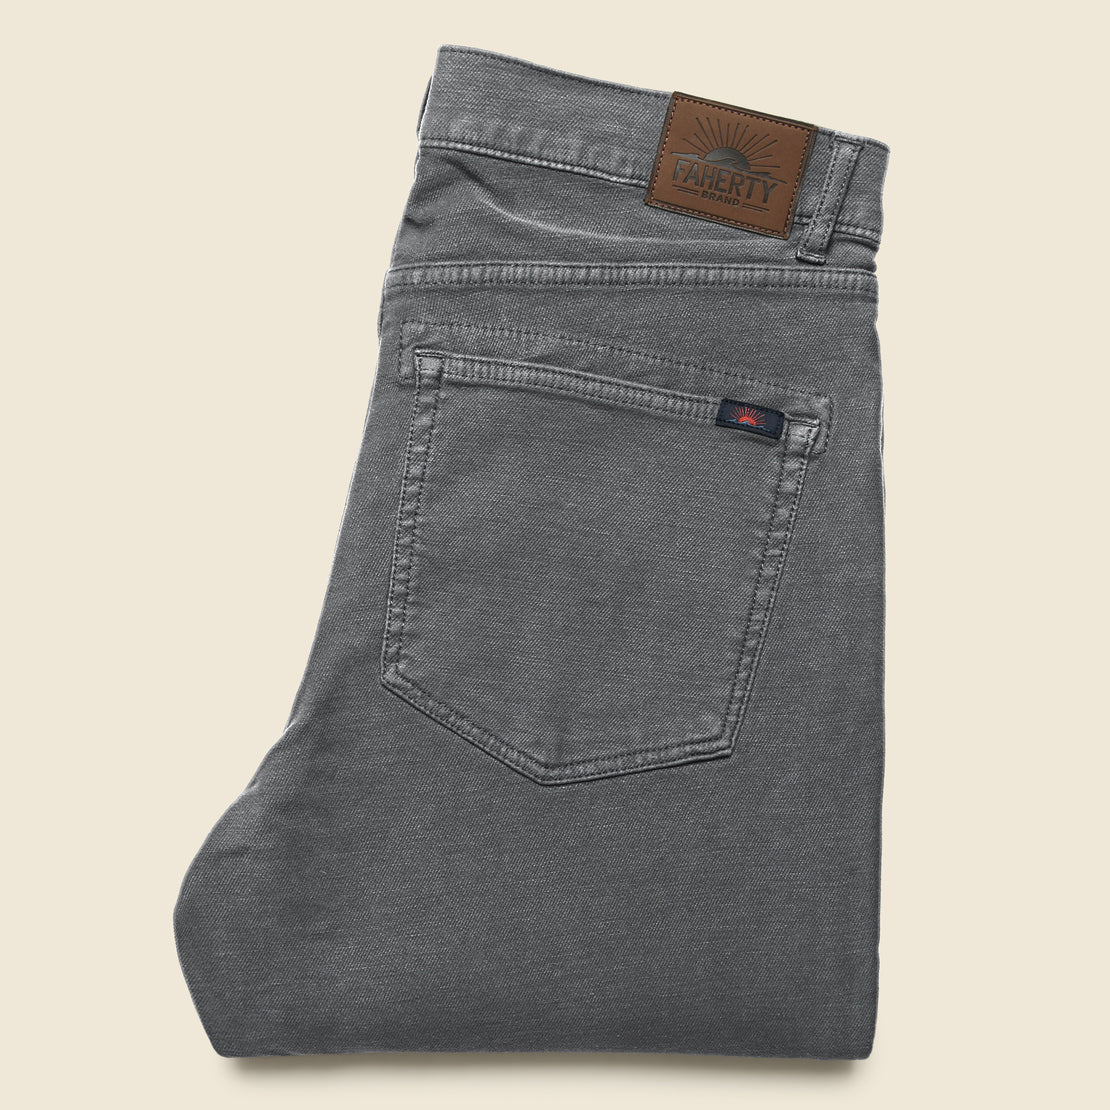 Stretch Terry Pant - Slate - Faherty - STAG Provisions - Pants - Twill